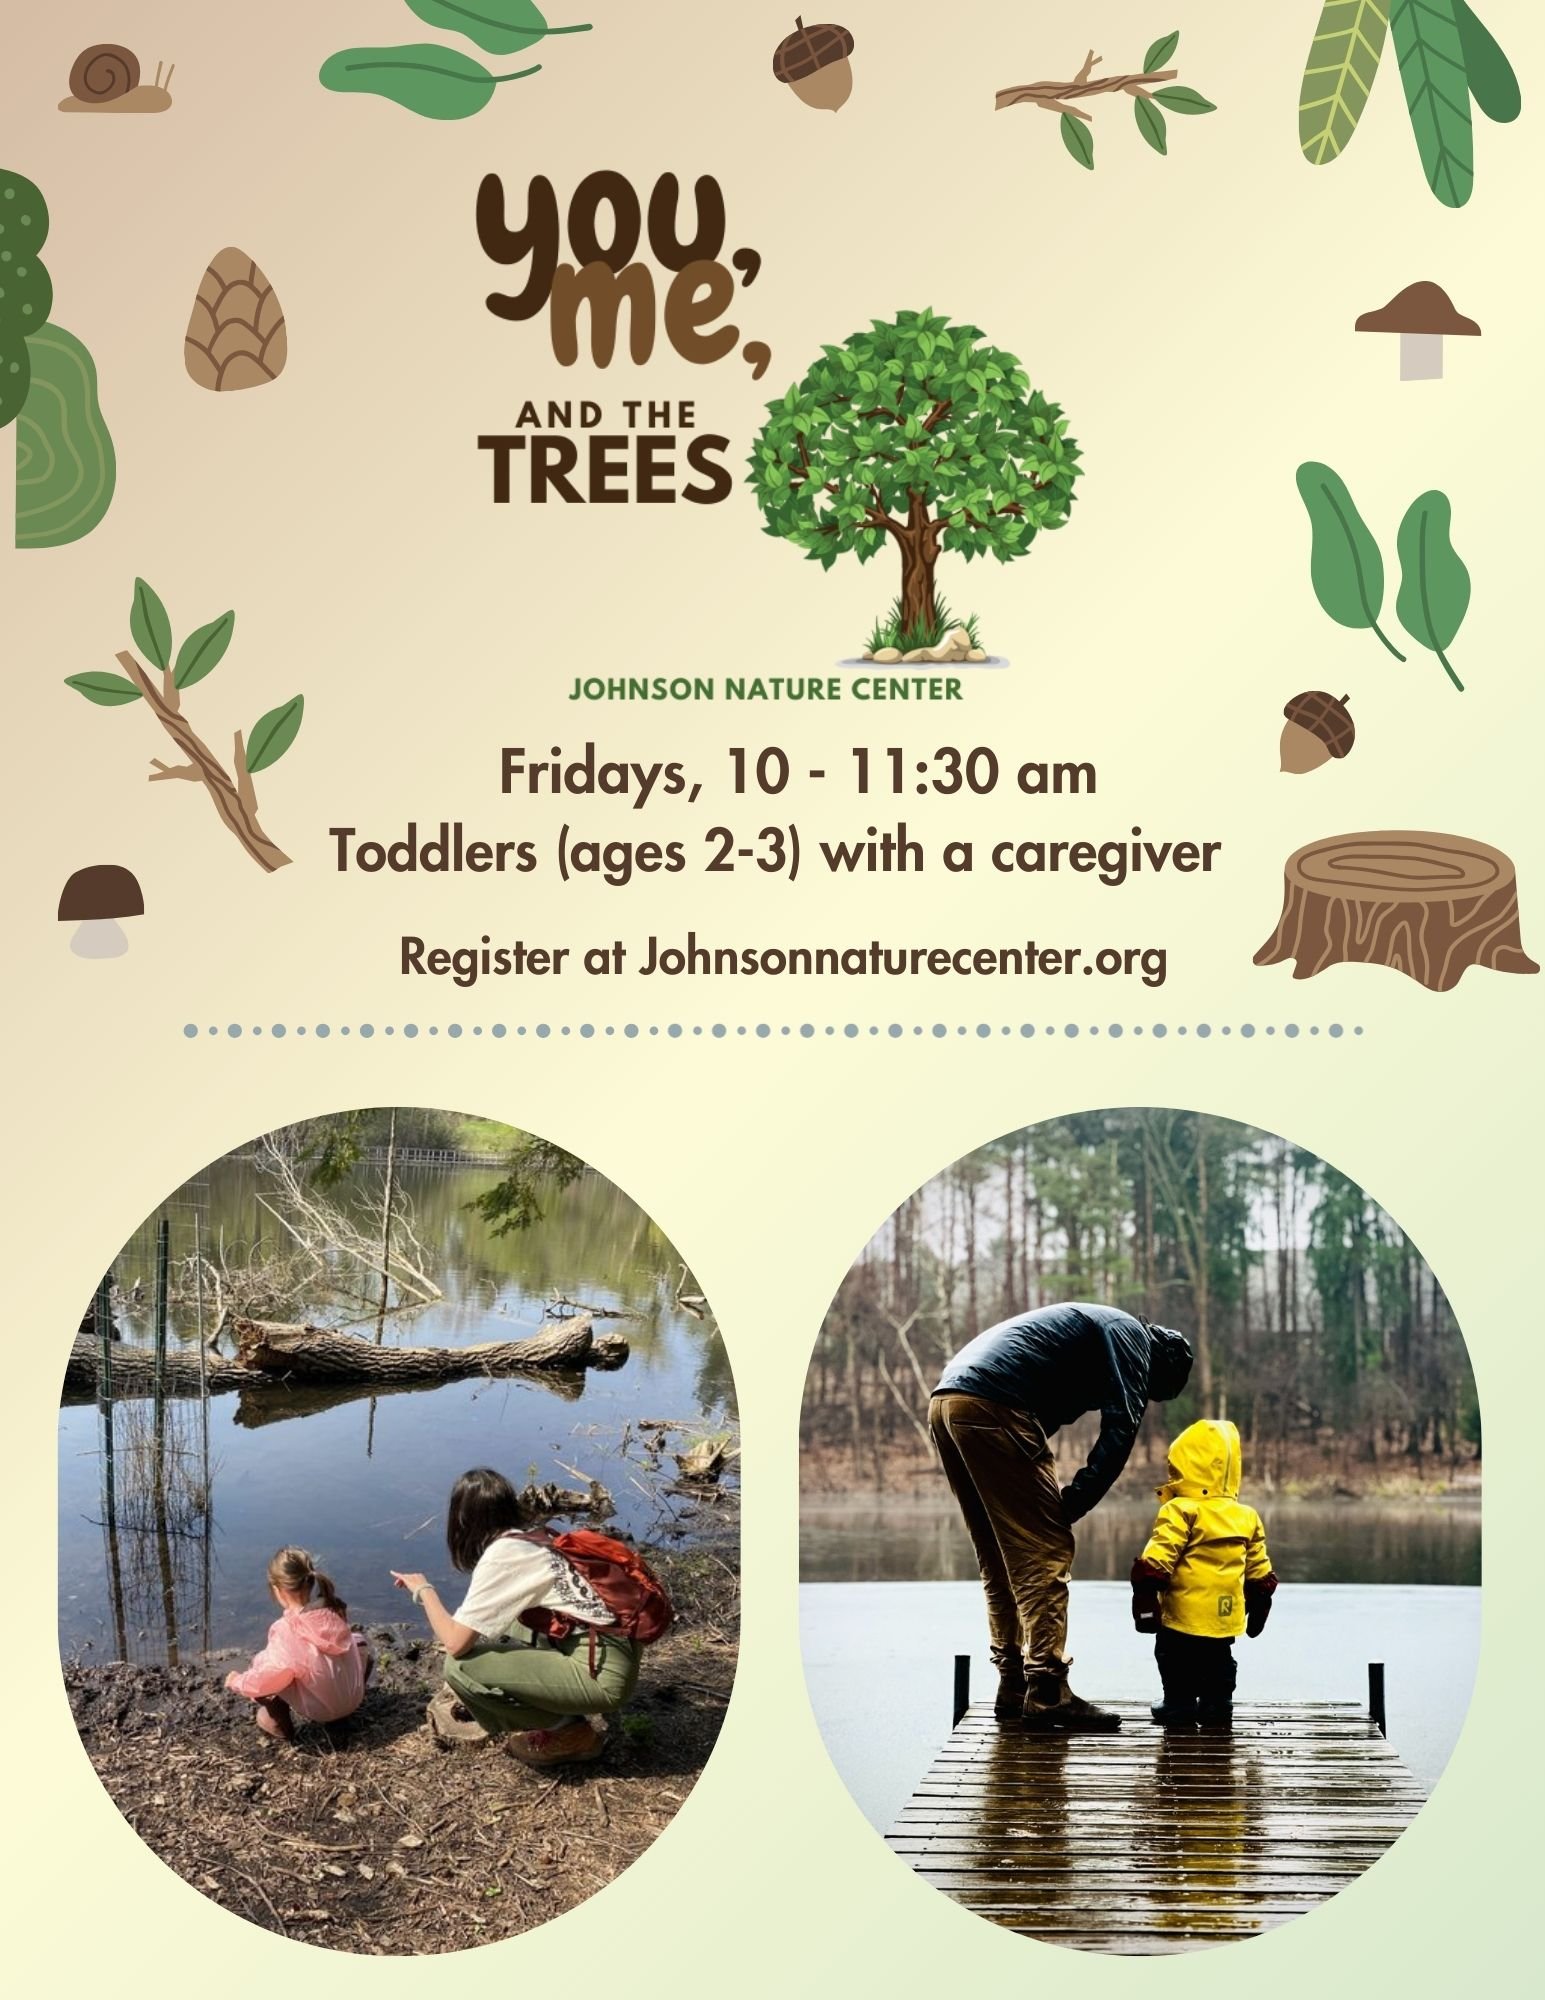 Registration is now open for May classes of our toddler program, &quot;You, Me and the Trees&quot;.
Visit johnsonnturecenter.org/youmetree to secure your spot and learn more!